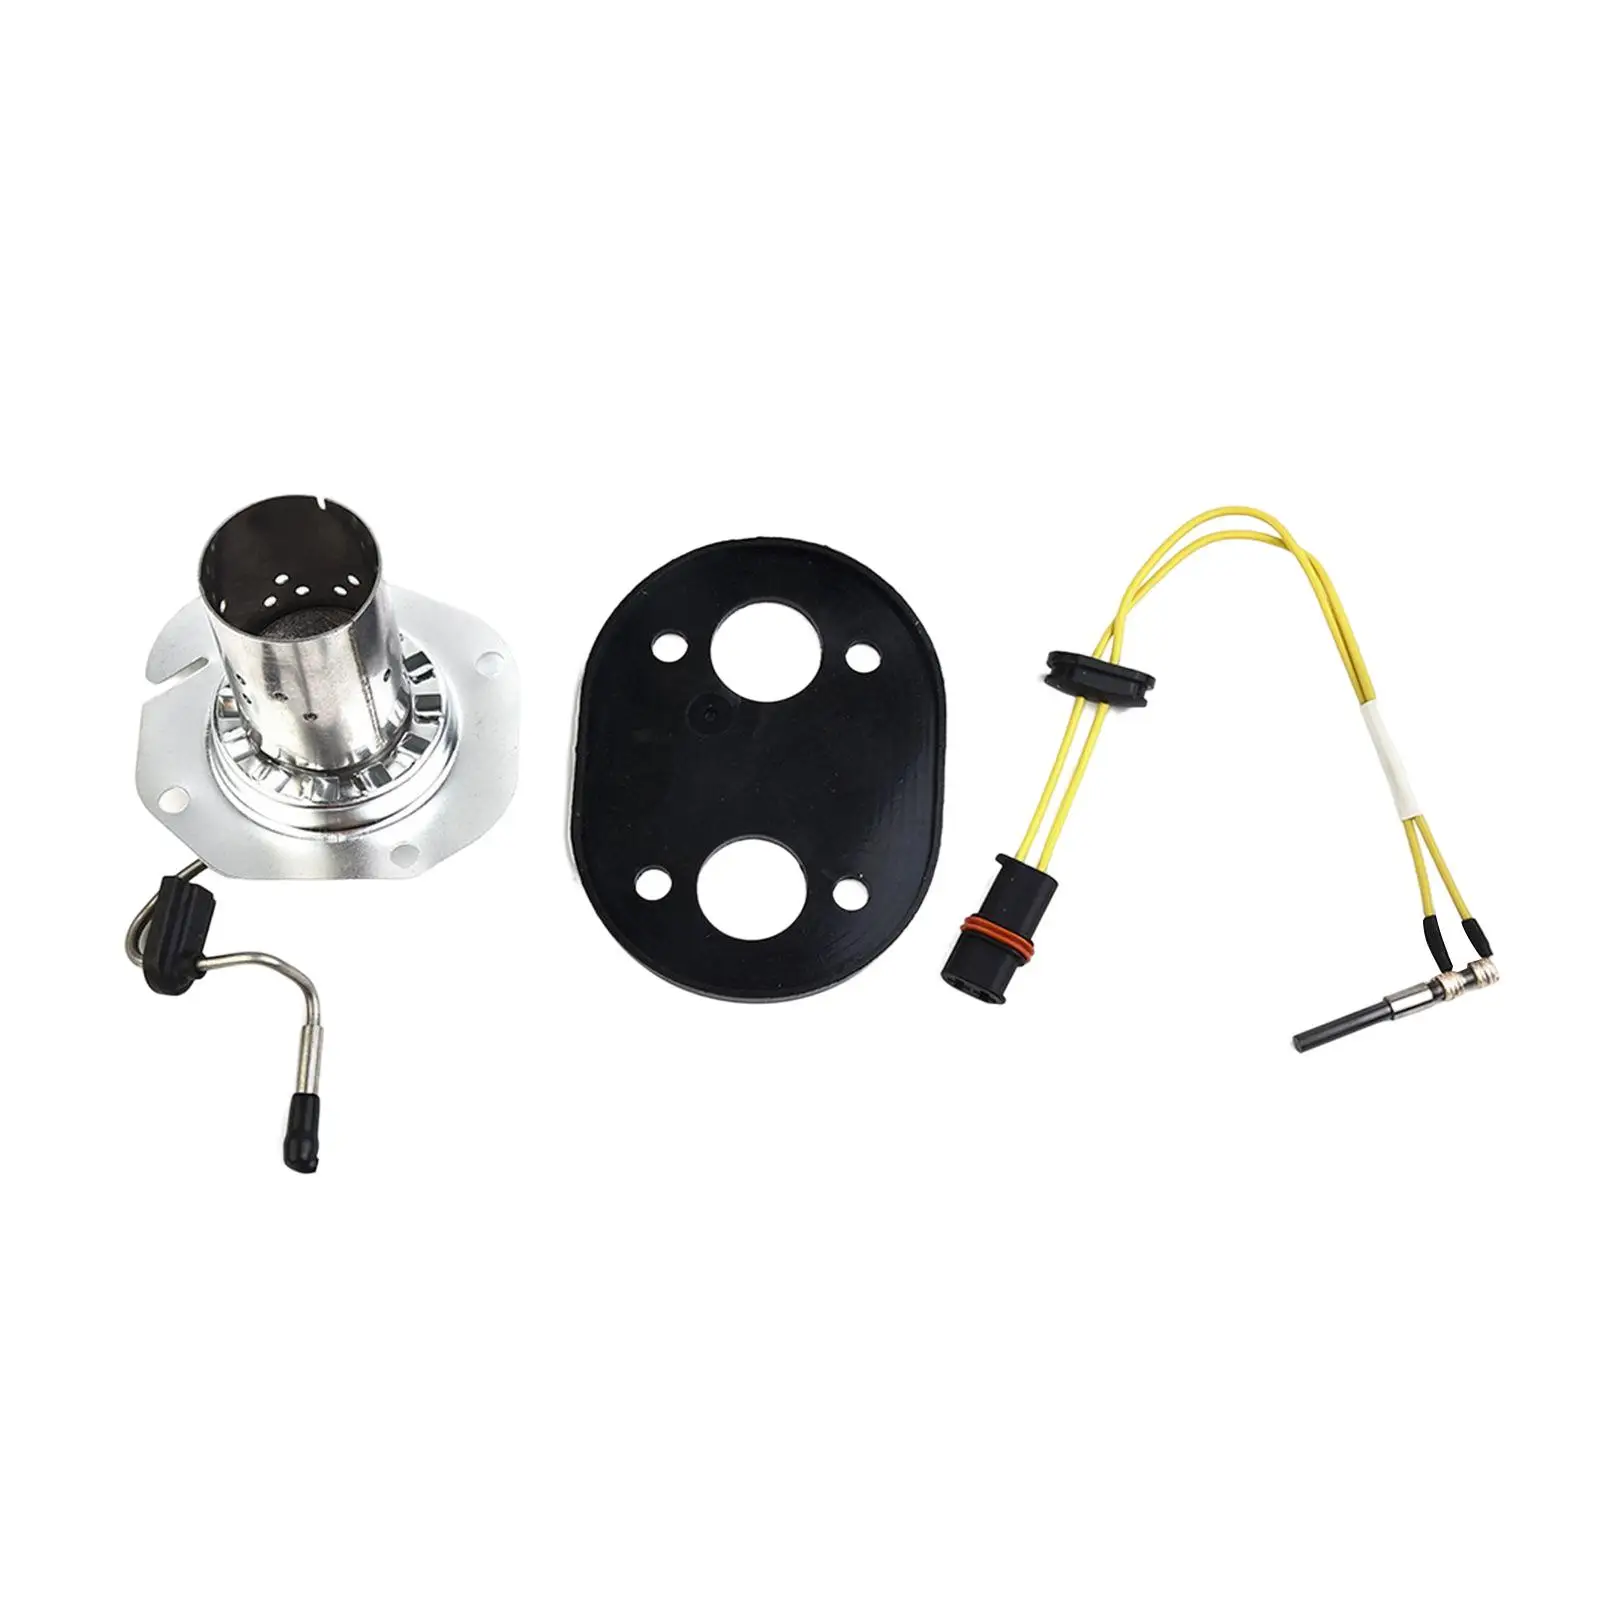 12V Heater Service Kit Diesel Parking Heater Service Kit for Air Top 2000 2000S 2000Stc Premium Replacement